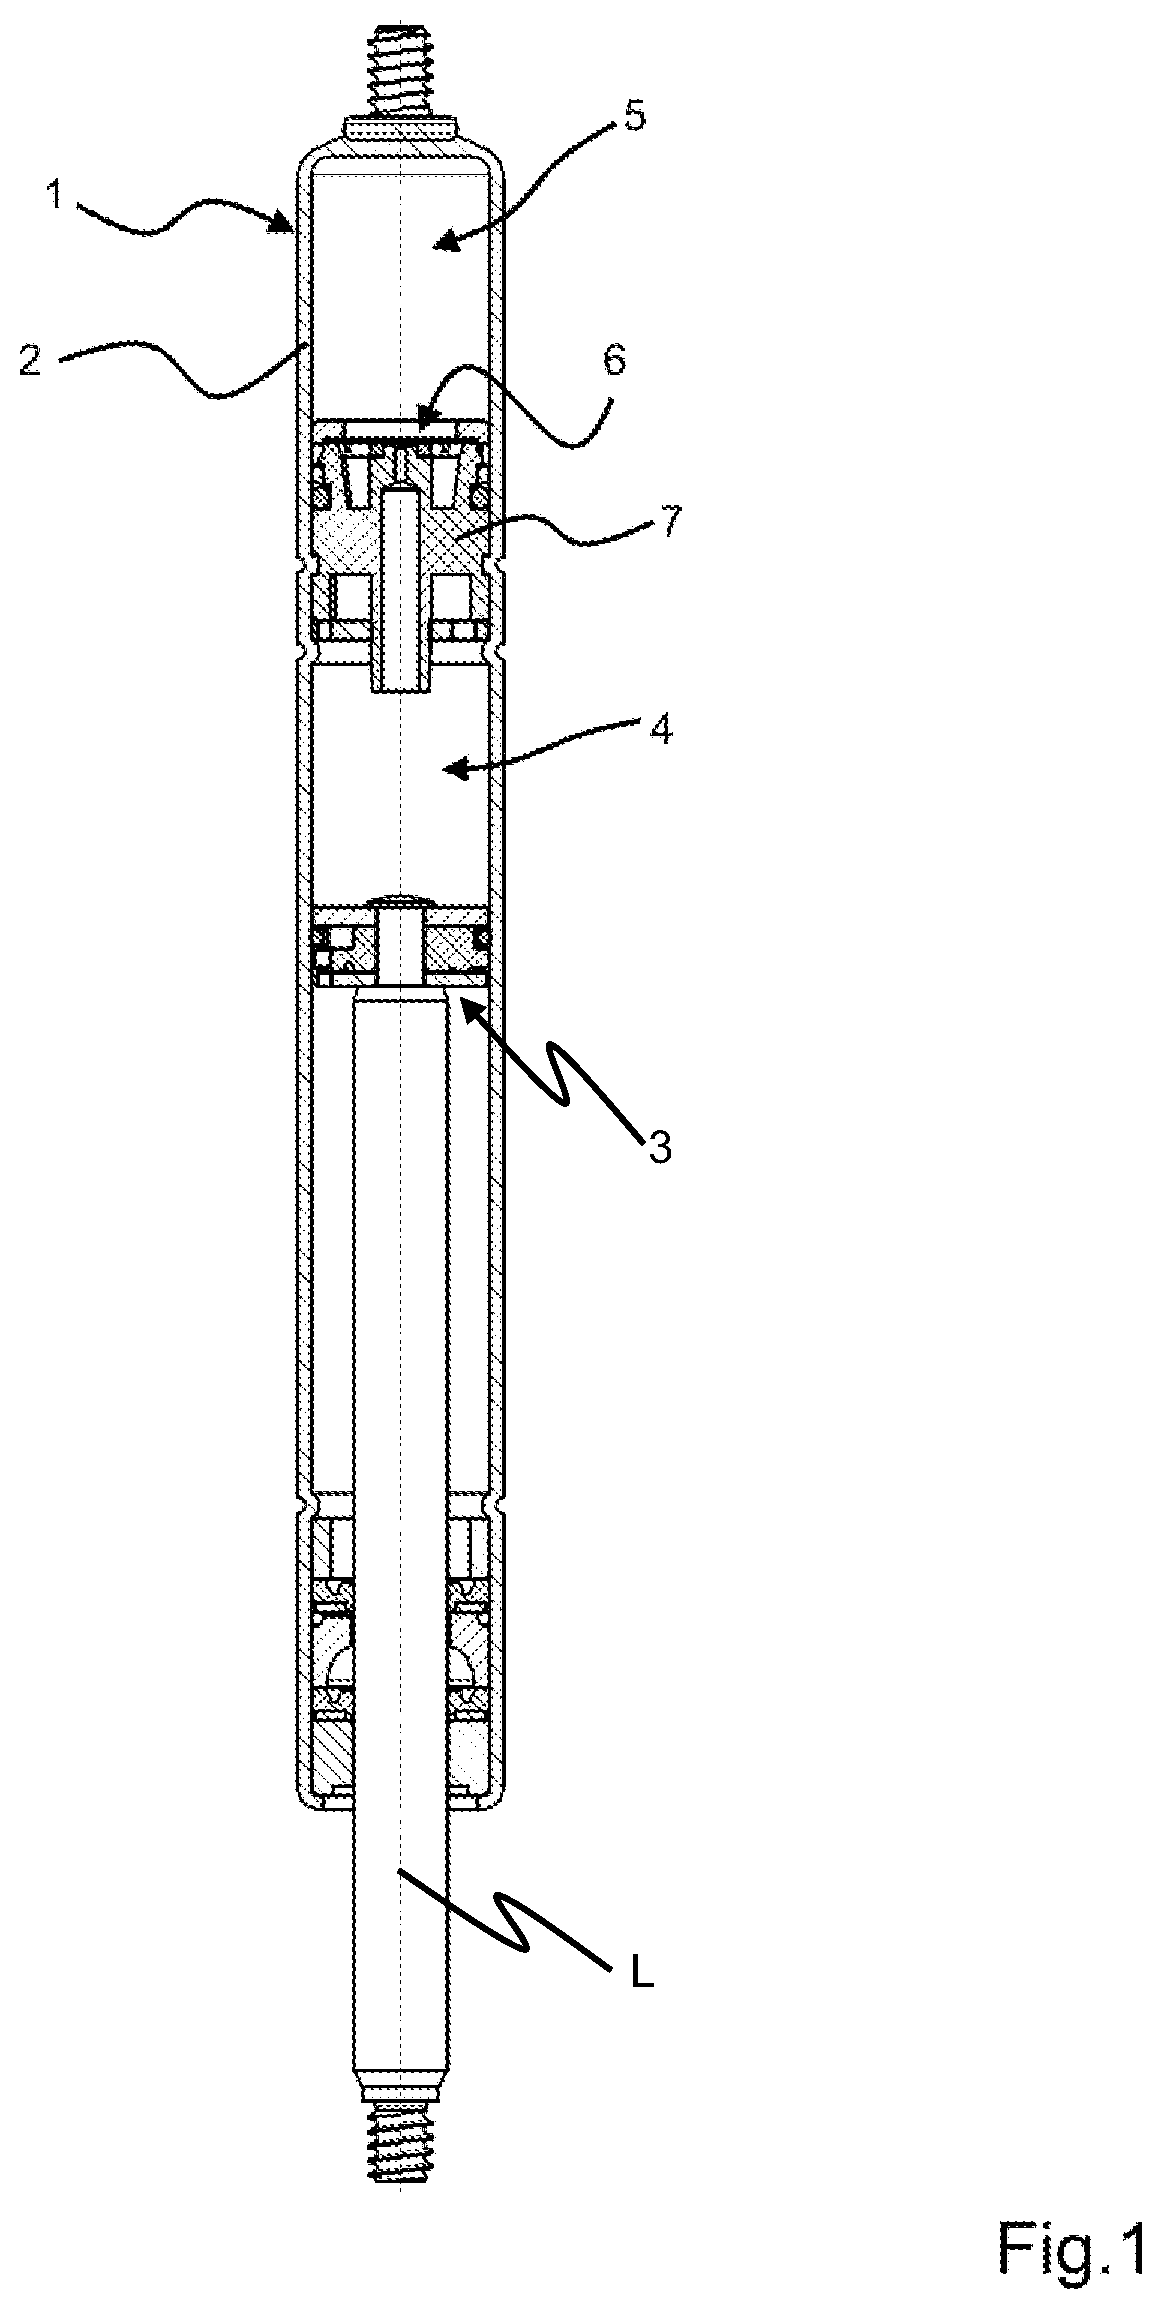 Temperature-driven valve assembly